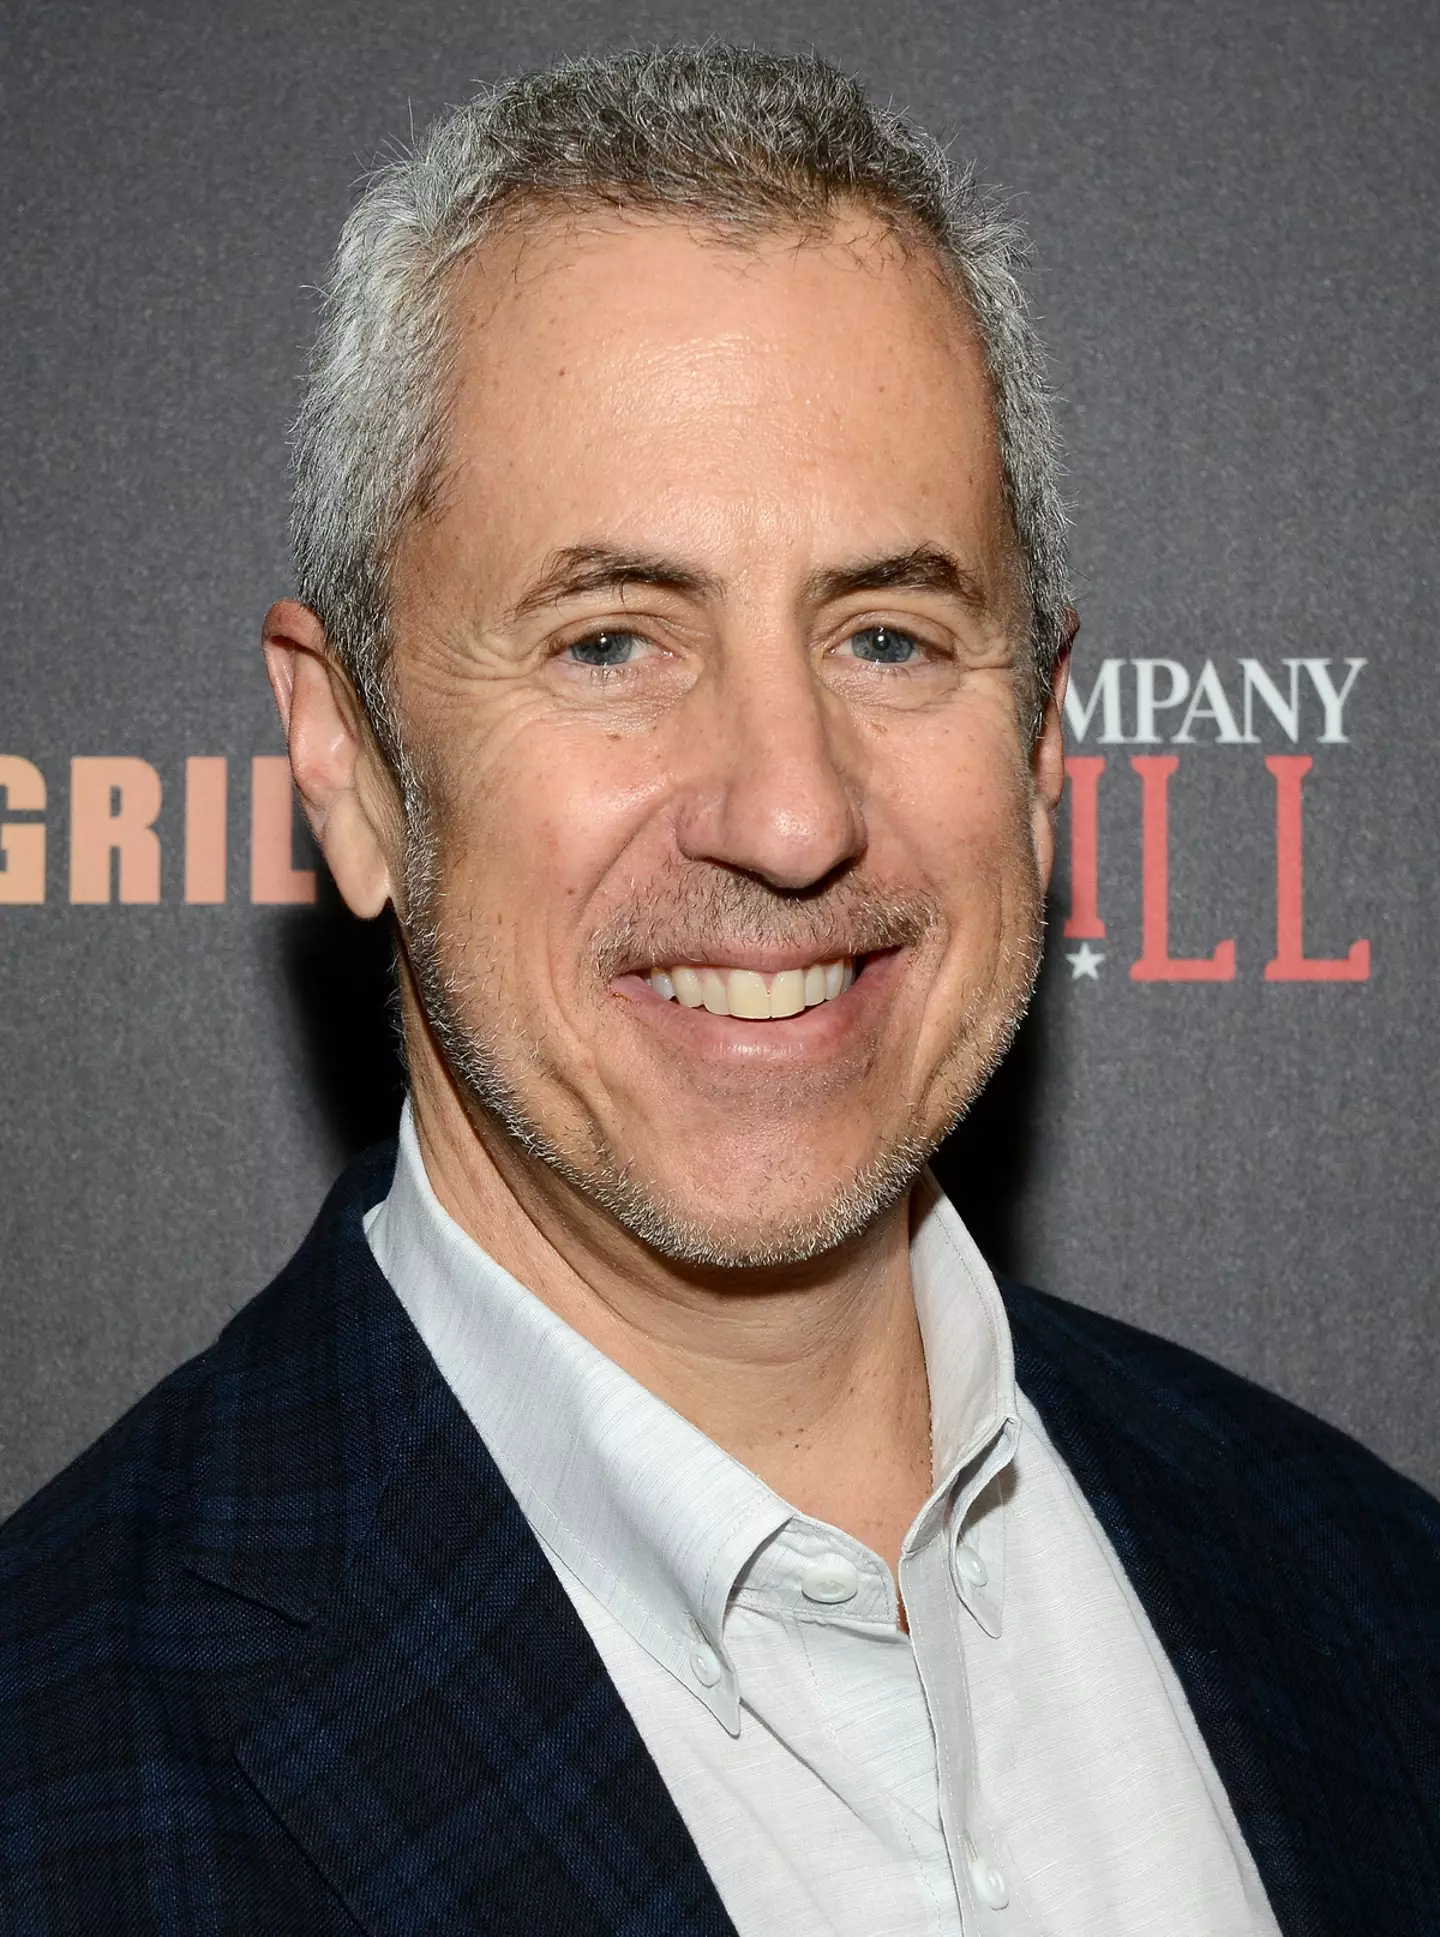 Shake Shack founder Danny Meyer said customers shouldn't feel an 'obligation' to tip in certain circumstances.